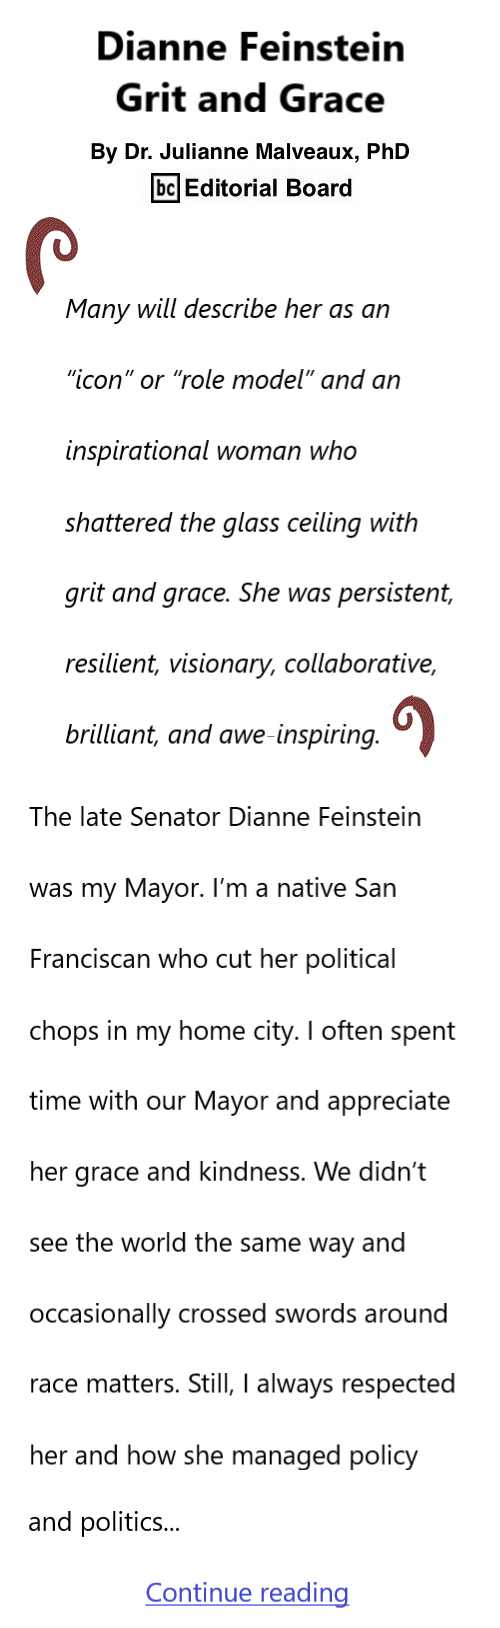 BlackCommentator.com Oct 5, 2023 - Issue 972: Dianne Feinstein: Grit and Grace By Dr. Julianne Malveaux, PhD, BC Editorial Board